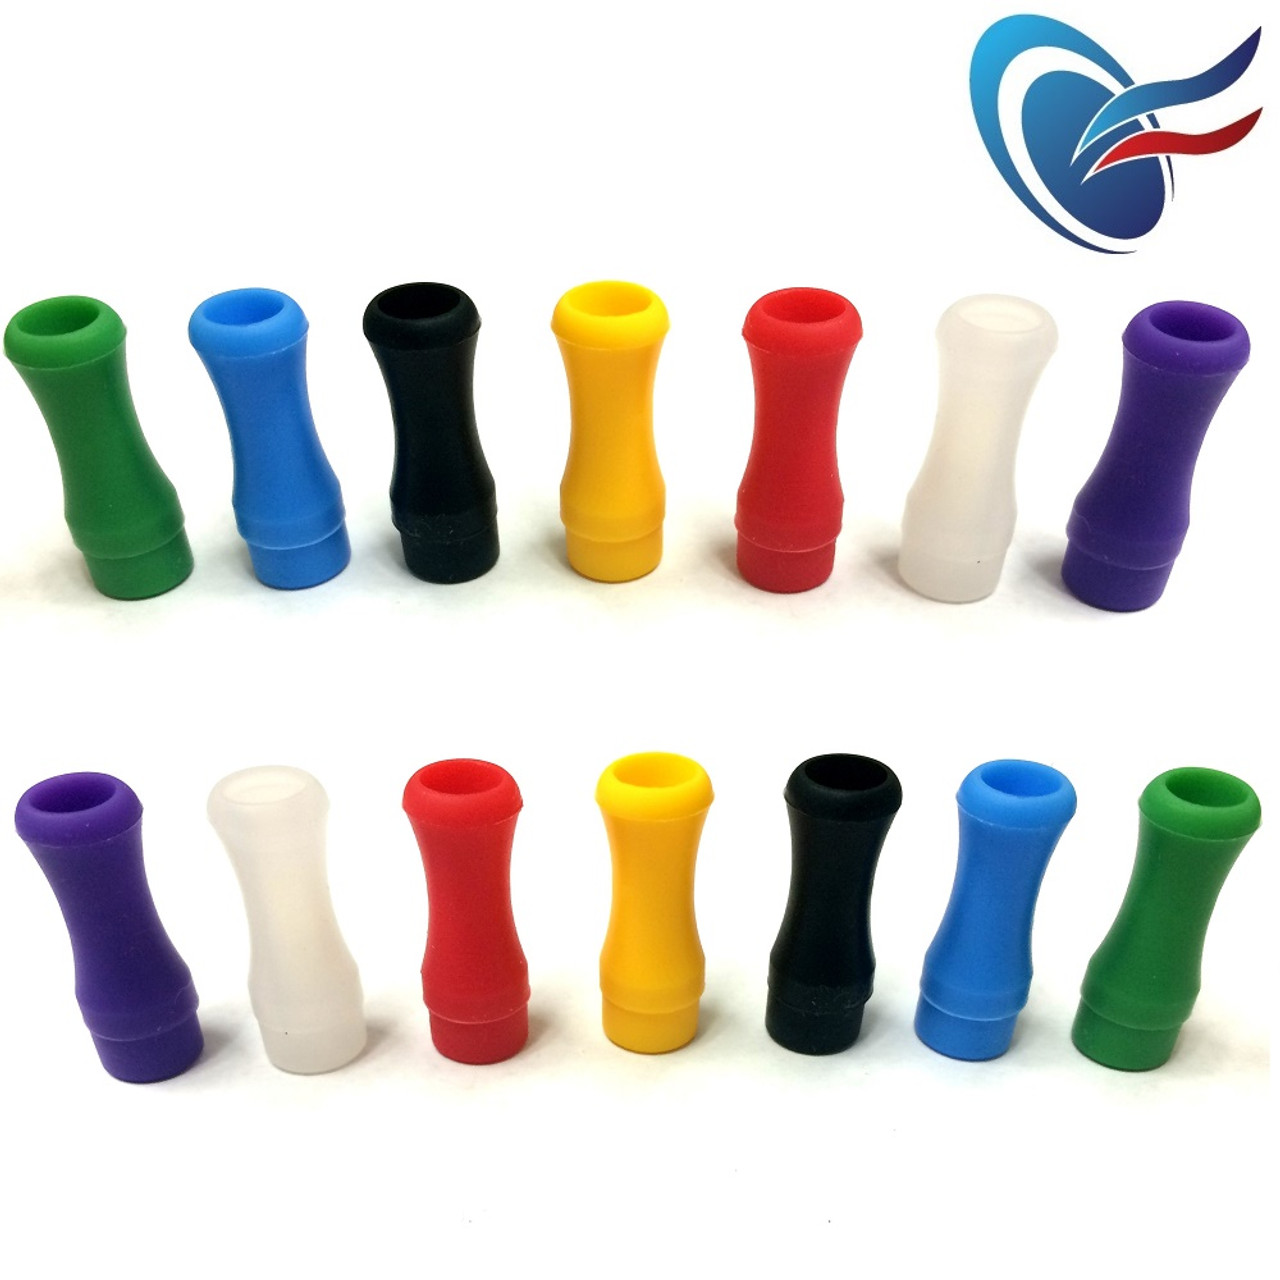 https://cdn11.bigcommerce.com/s-sd7hcu7/images/stencil/1280x1280/products/398/959/Silicone_510_drip_tip_tester_colors__15210.1553634511.jpg?c=2